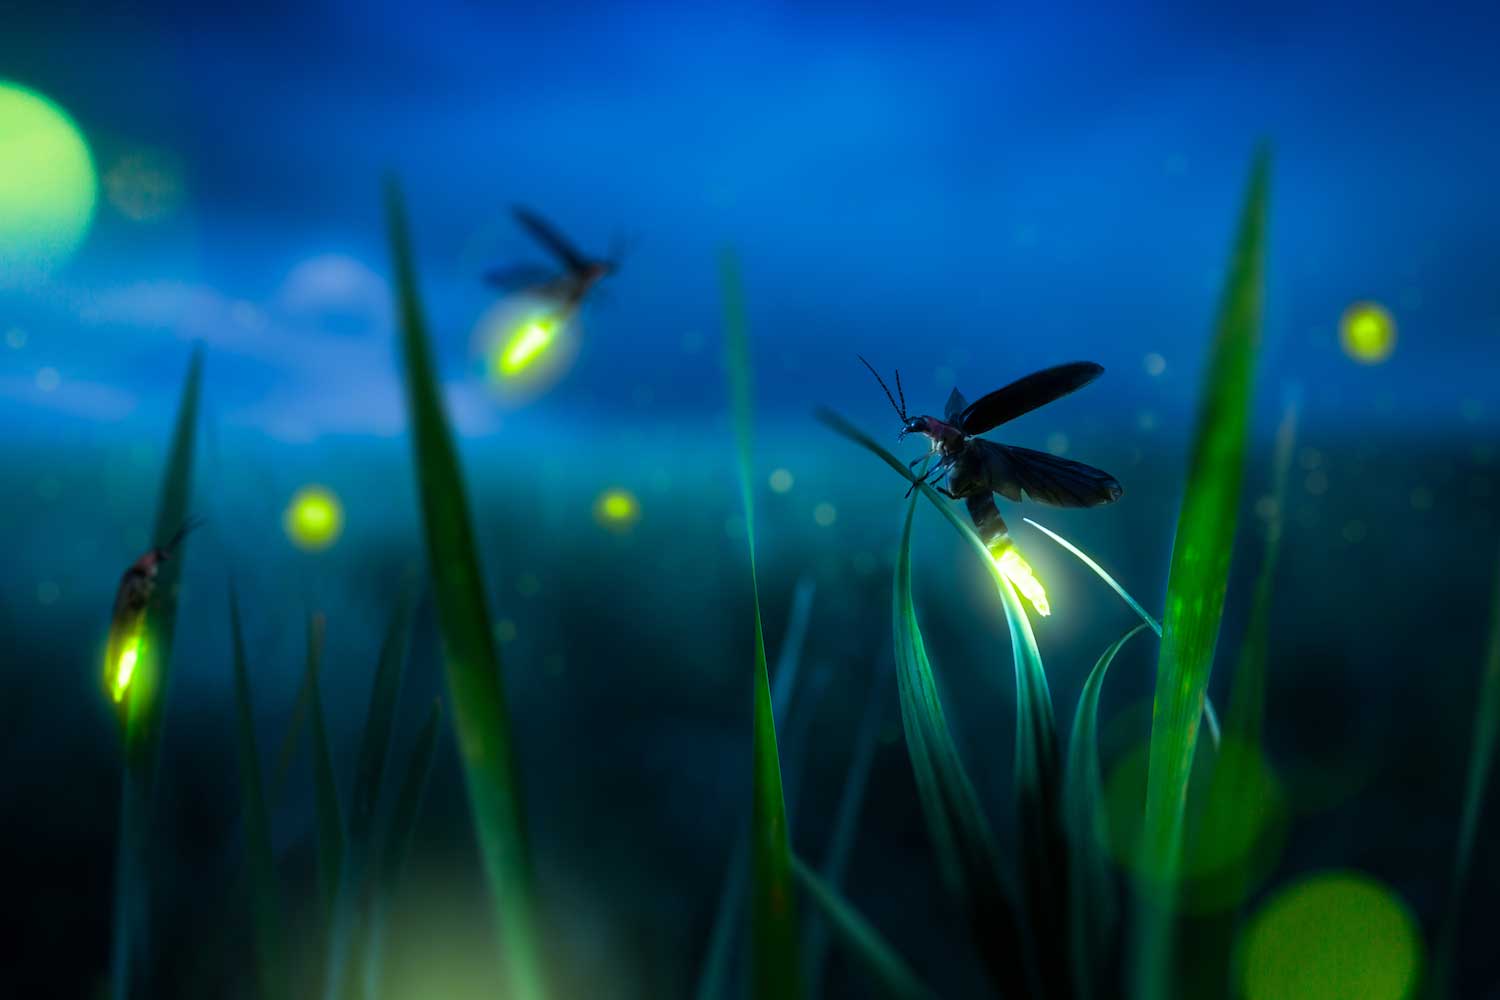 Fireflies glowing while flying above grass.